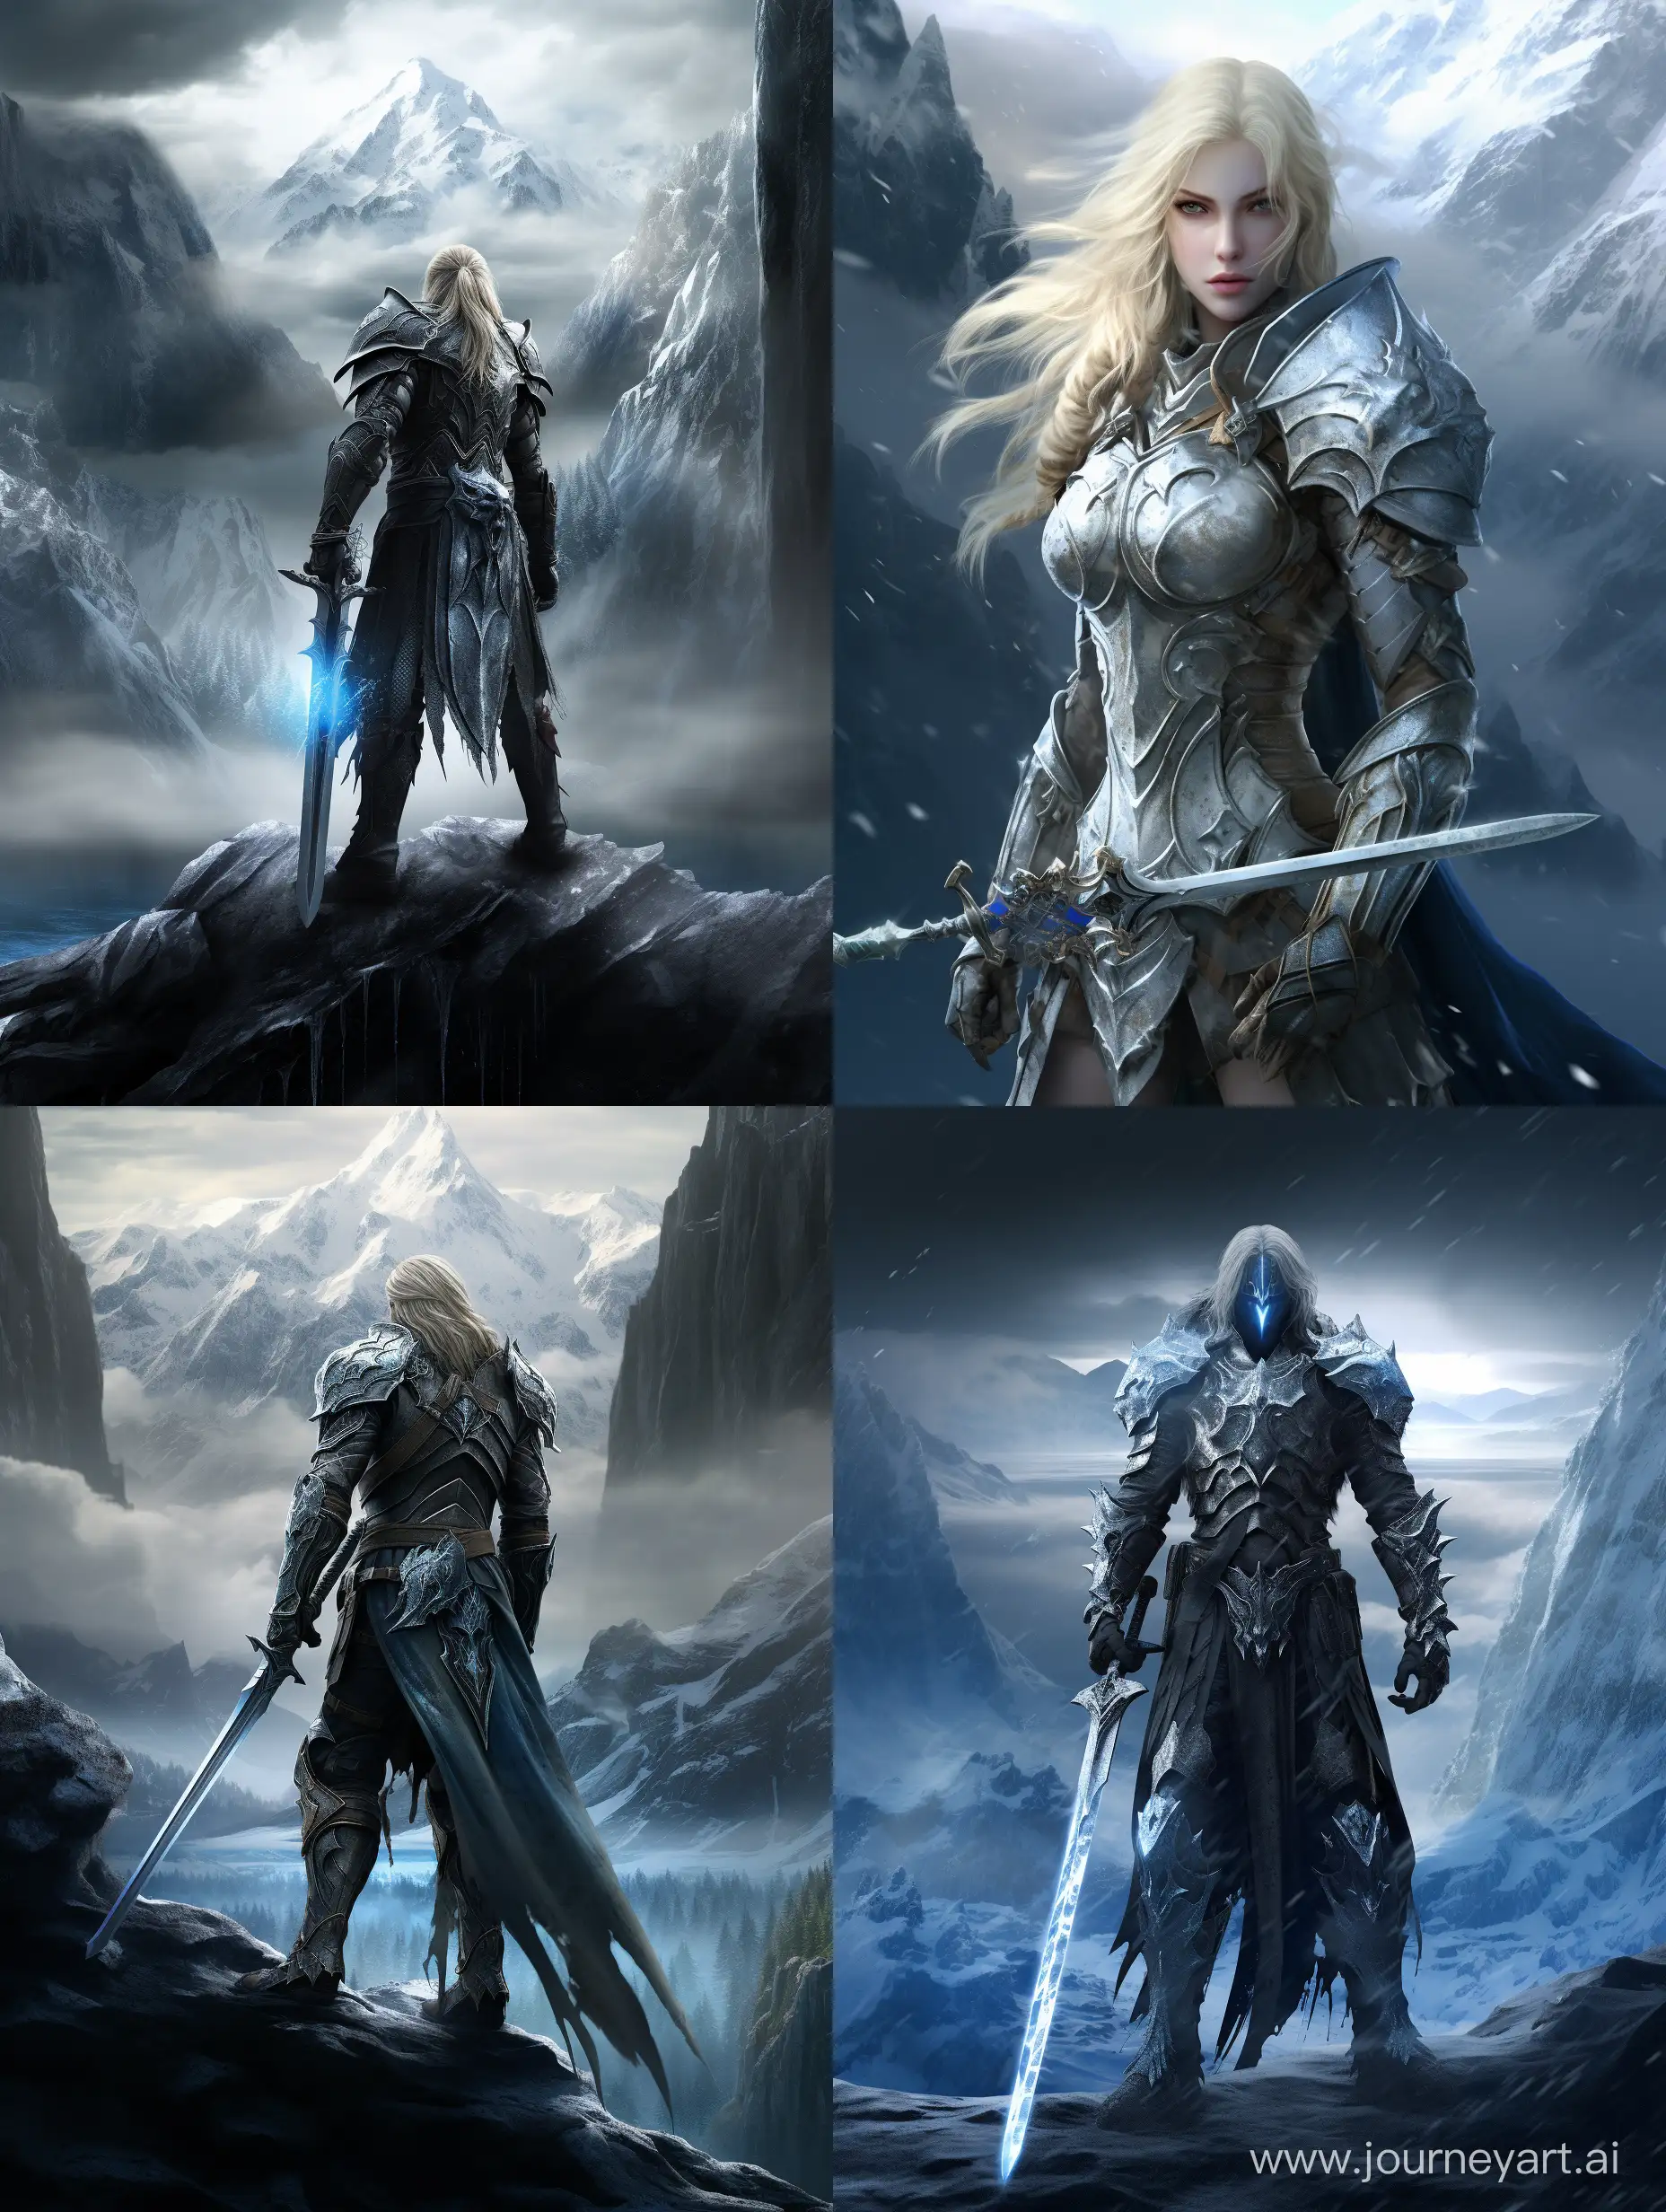 Epic-UltraRealistic-Digital-Painting-Arthas-in-a-Meticulously-Lit-Environment